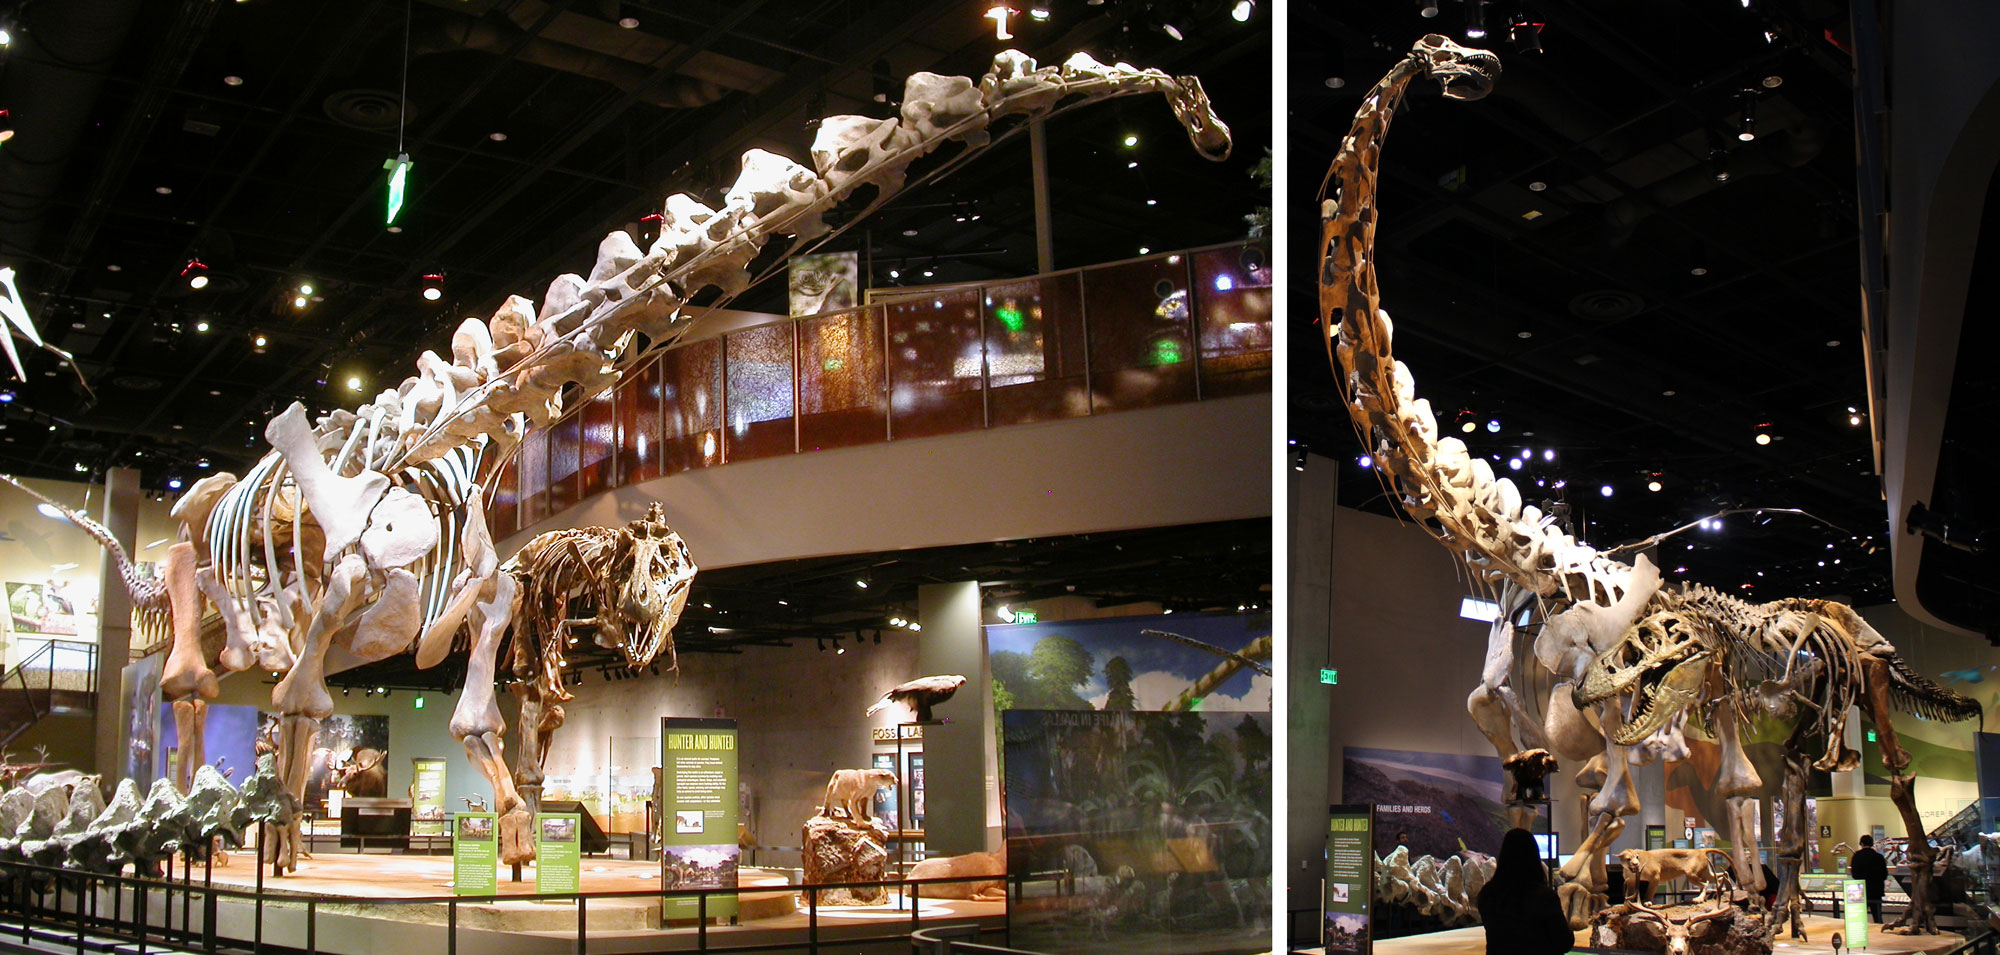 Photos showing two views of a display of Alamosaurus (a long-necked sauropod) next to a Tyrannosaurus at the Perot Museum. The Alamosaurus is much larger than the Tyrannosaurus.